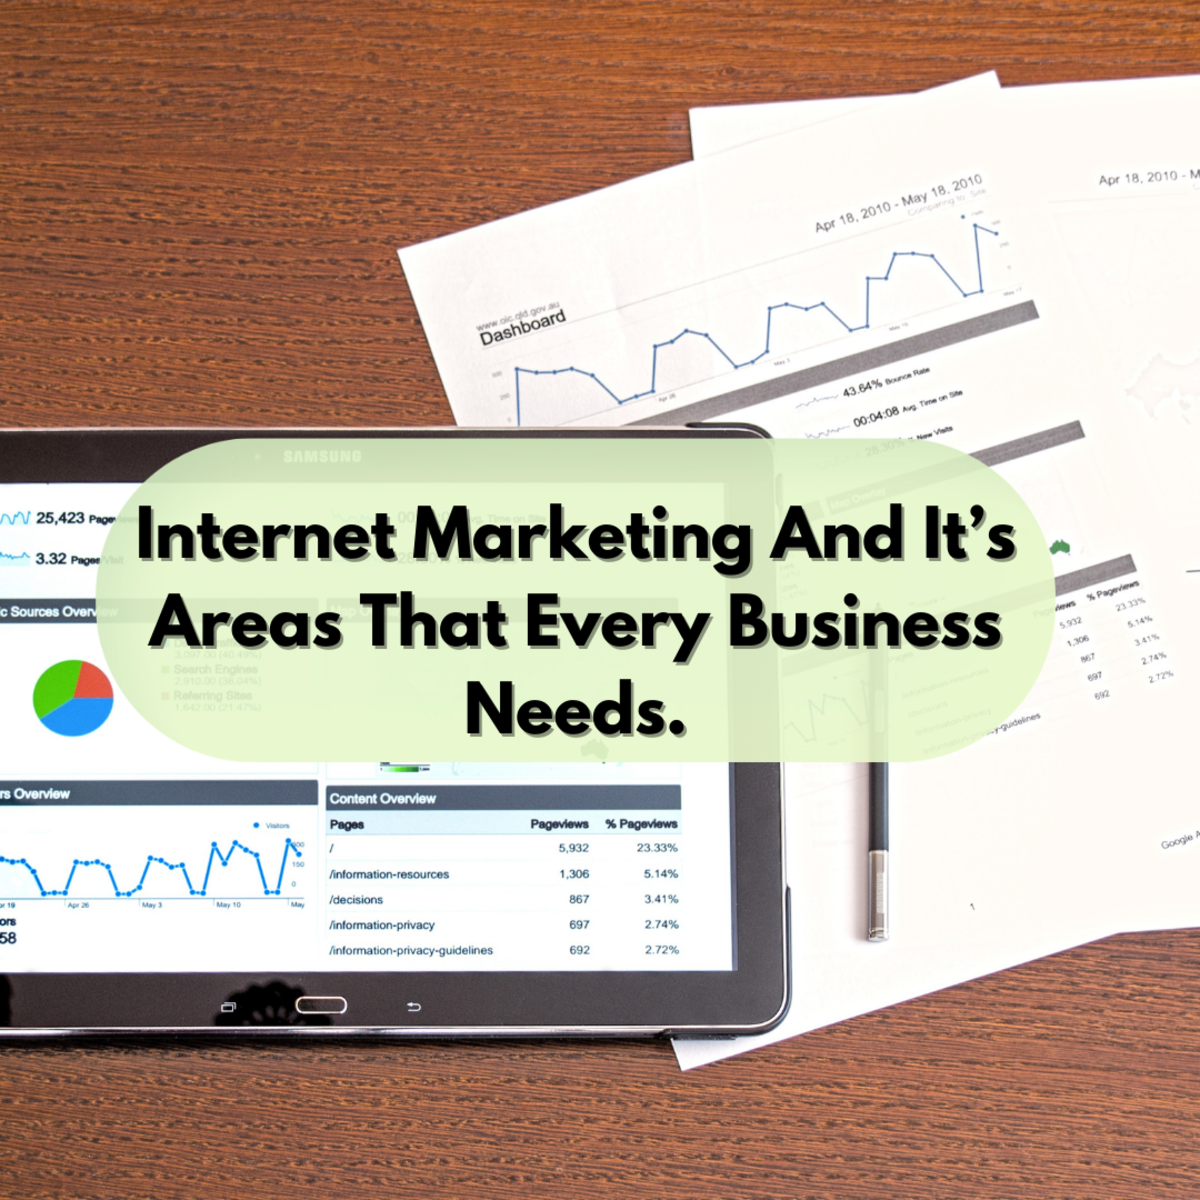 Internet Marketing And It’s Areas That Every Business Needs